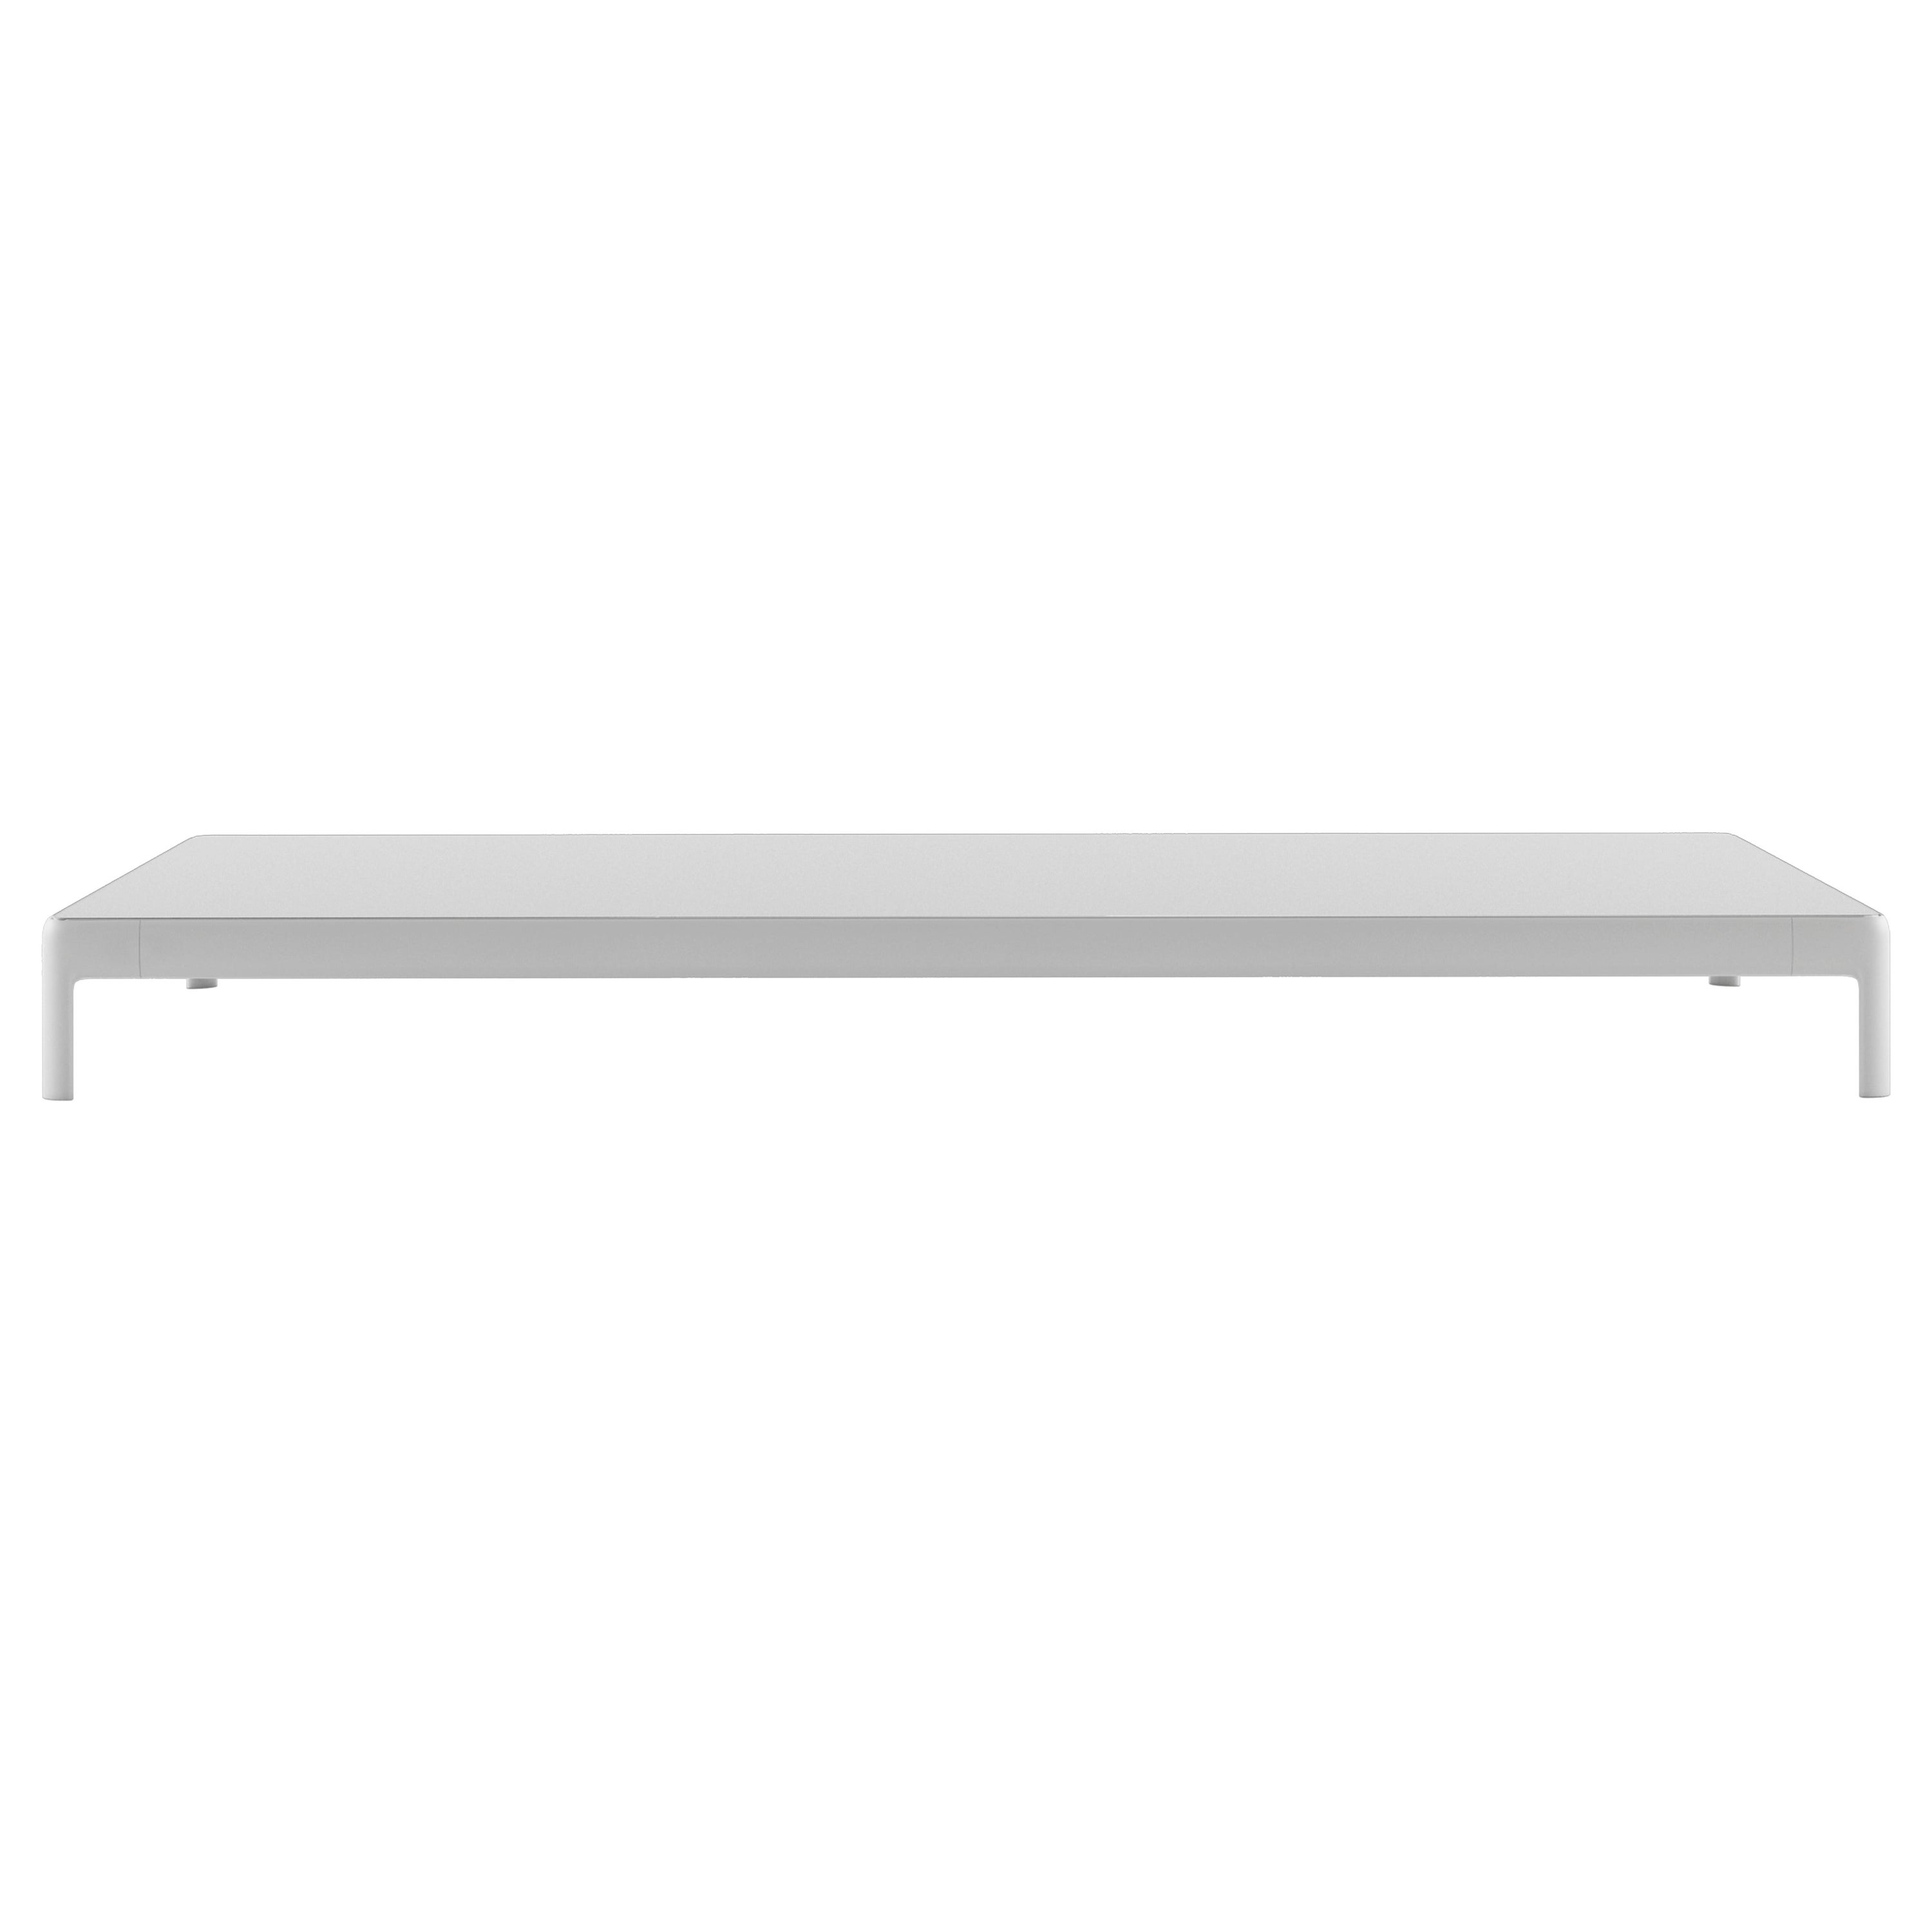 Alias P73 AluZen Soft Low Table Outdoor in White with Lacquered Aluminium Frame For Sale